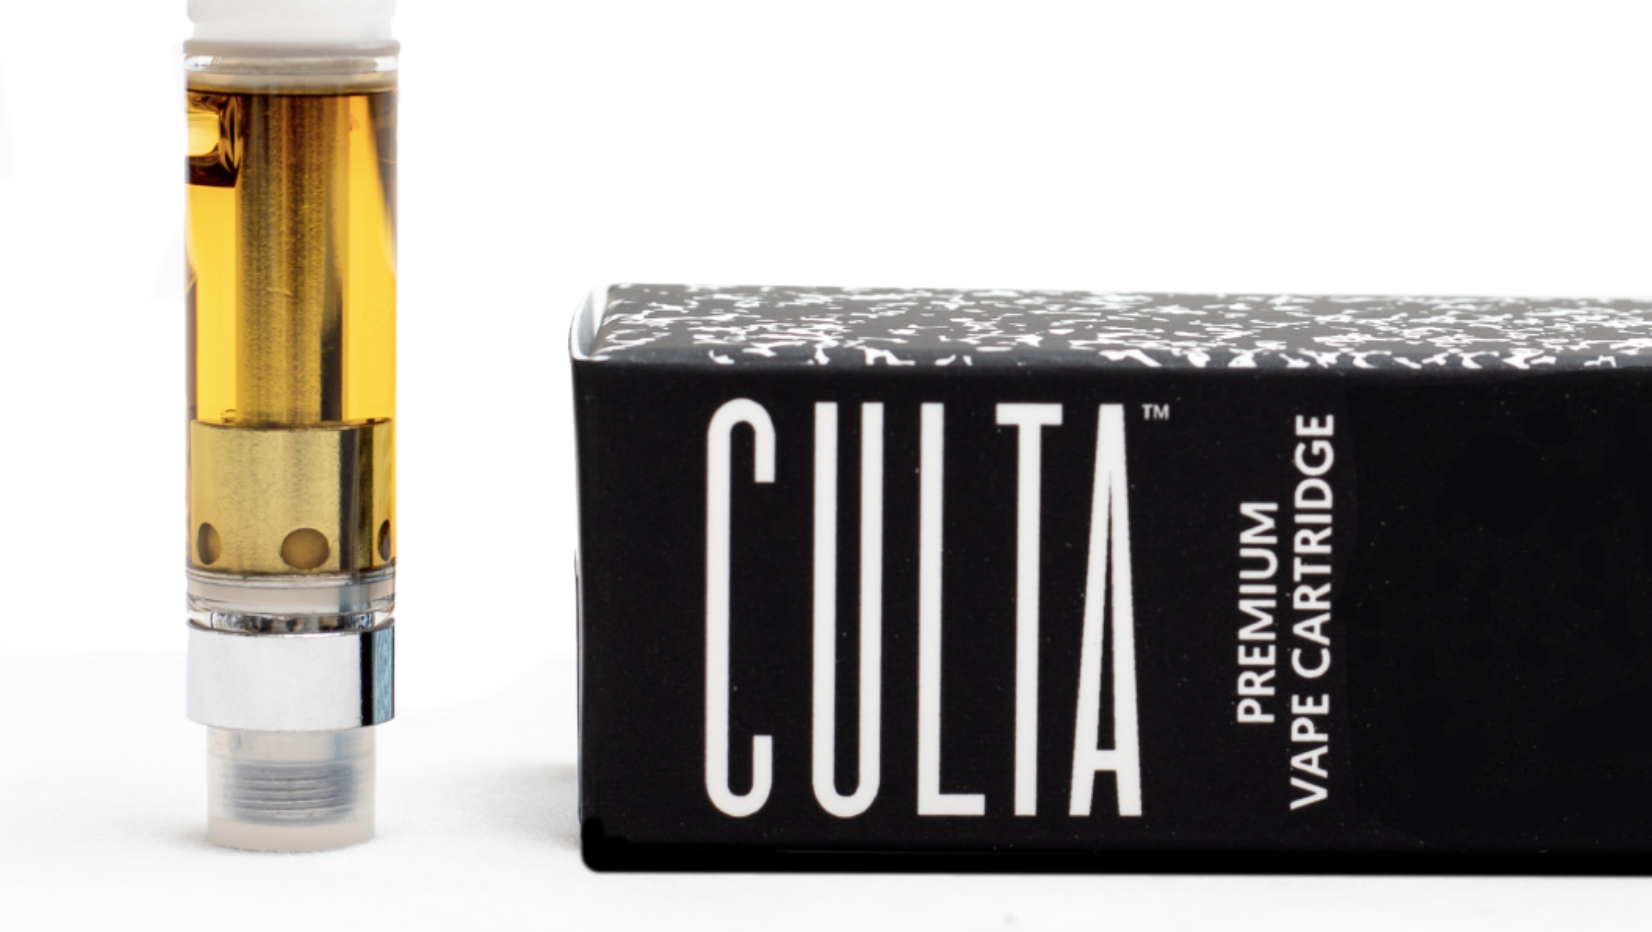 culta branded vape with its packaging